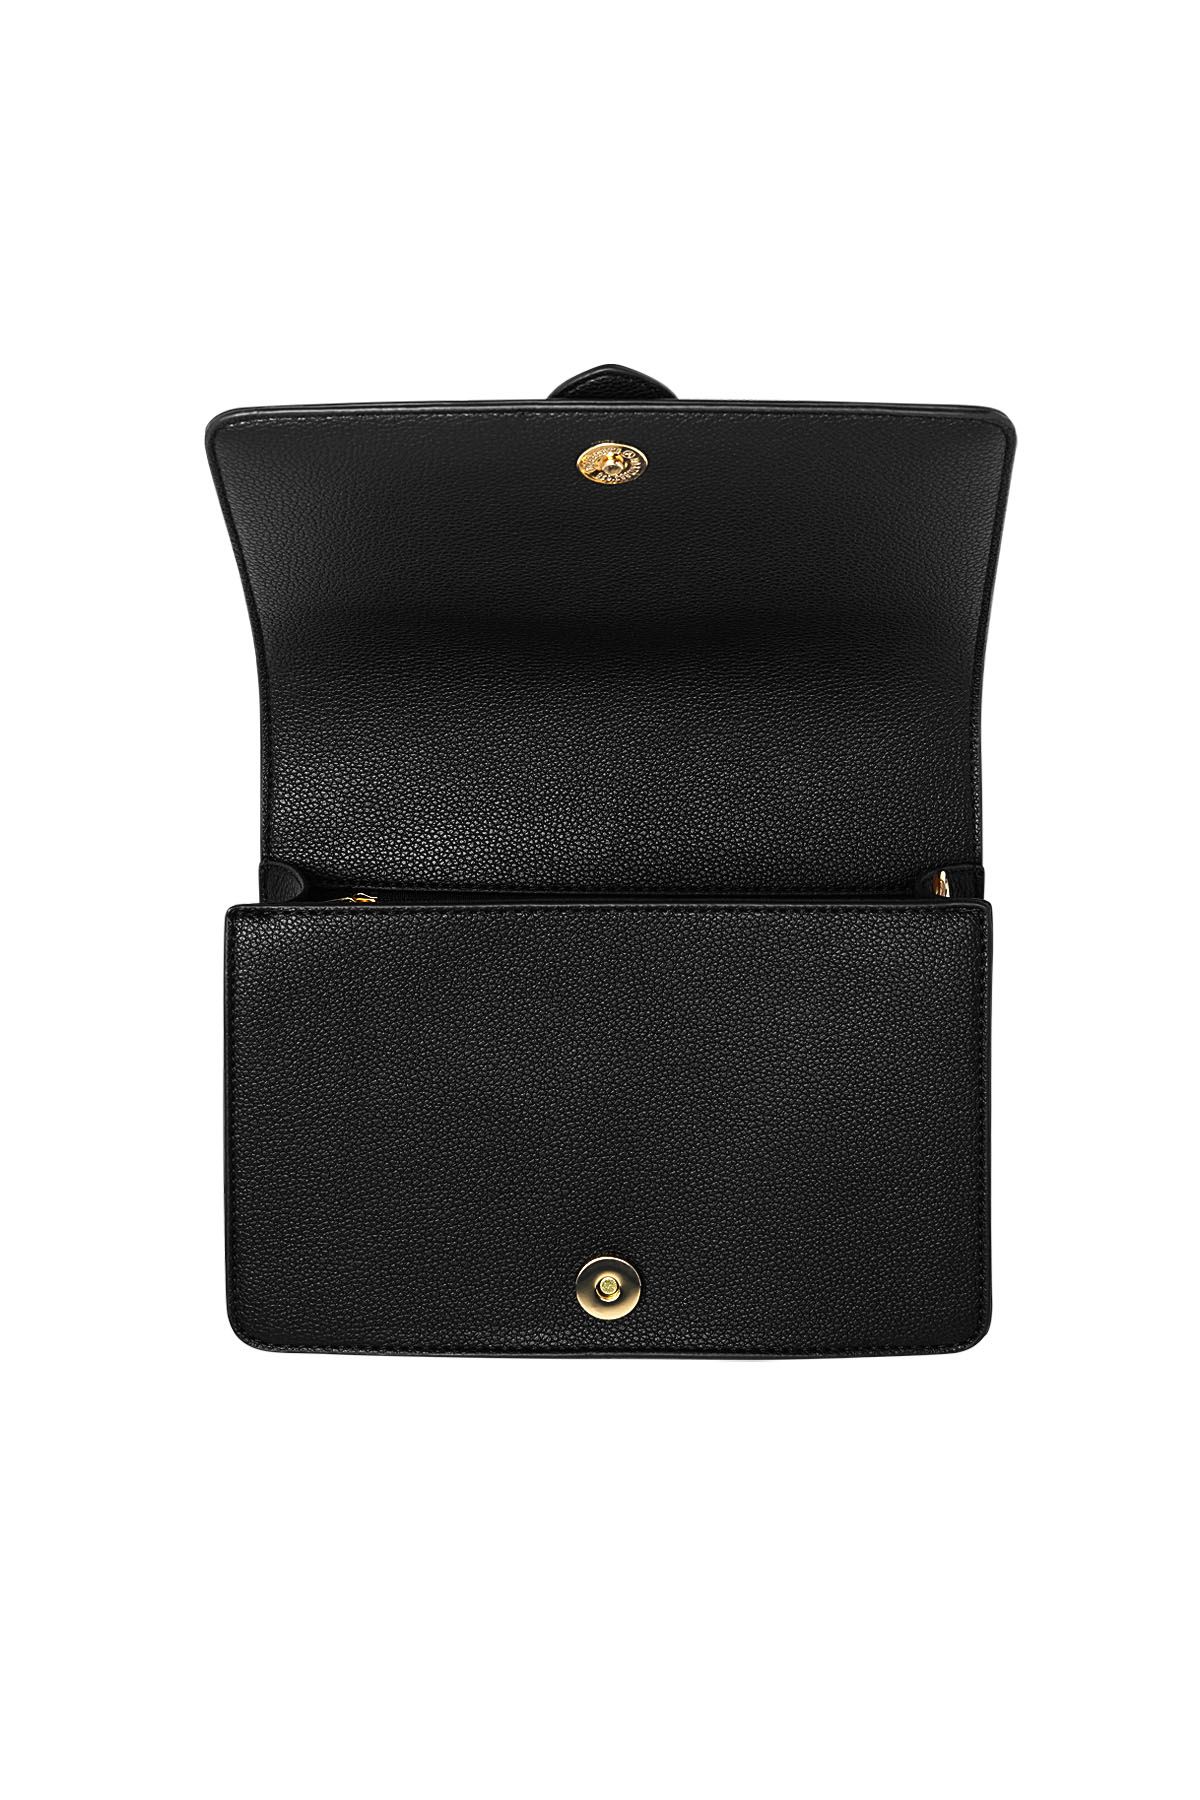 Bag buckle classy - black h5 Picture5